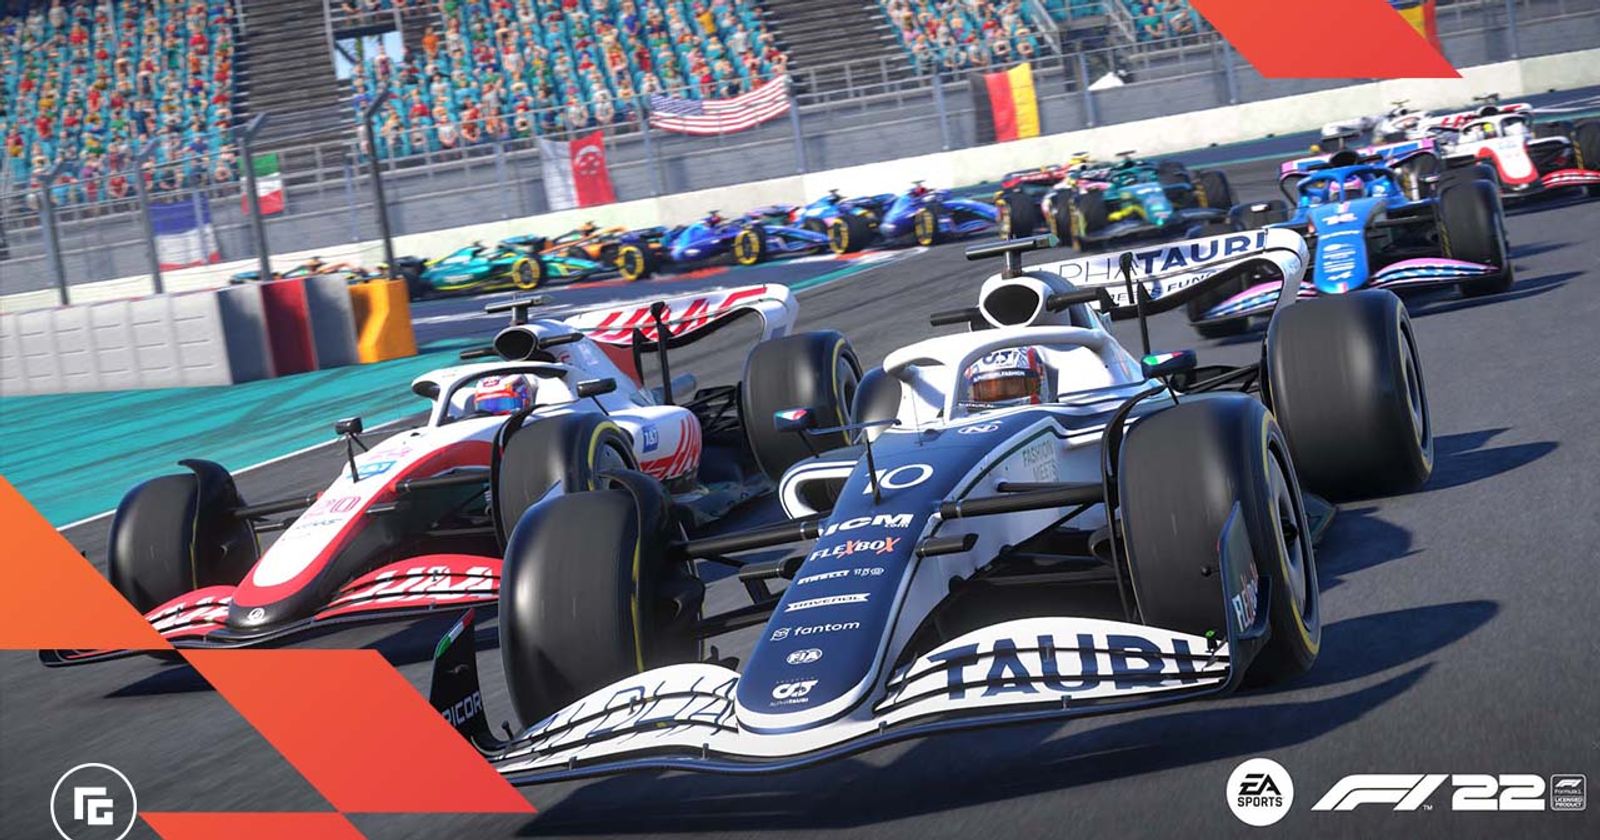 Hands-on: The most important new features in F1 22